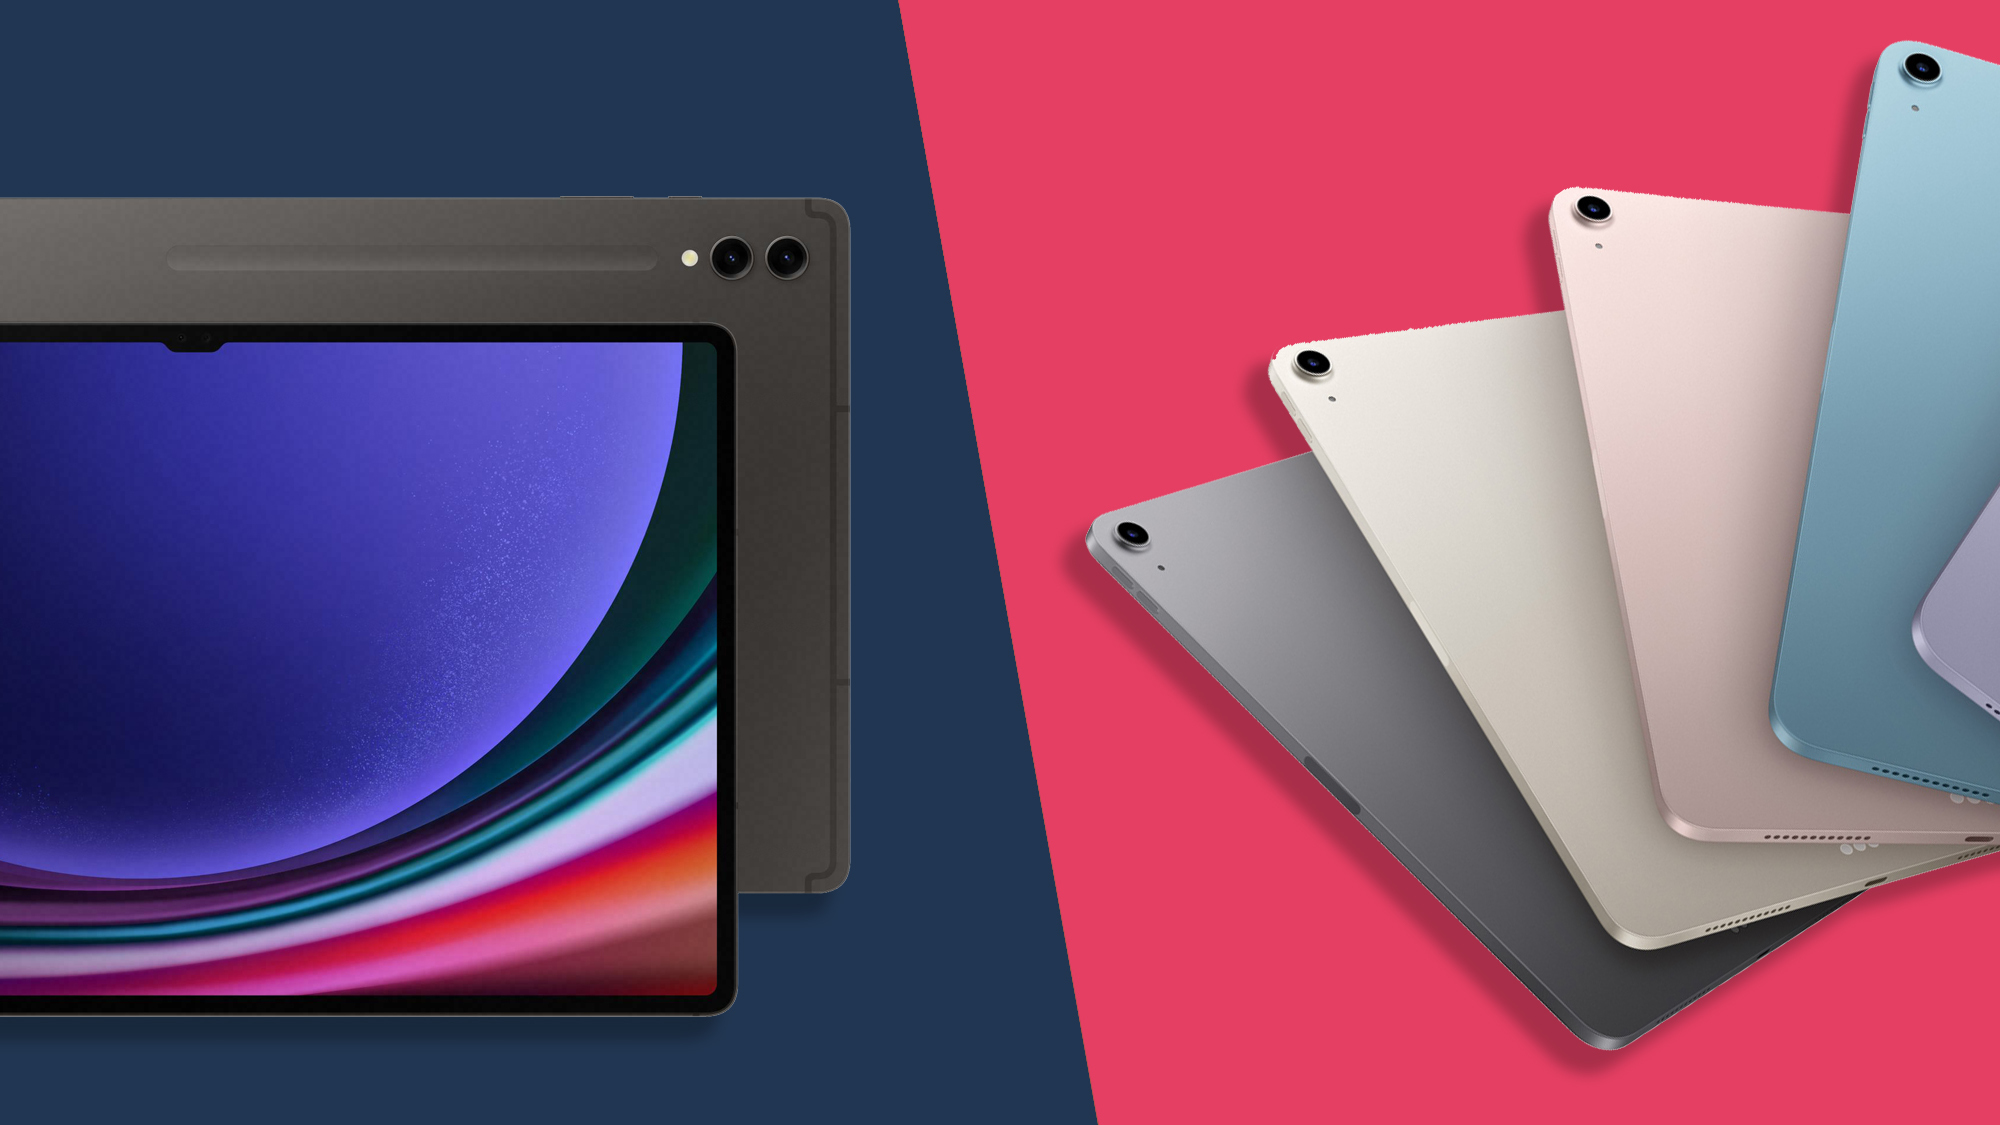 The Galaxy Tab on the left and iPad Air on the right, we see the full range of iPad colors and both the back and front of the Samsung tablet